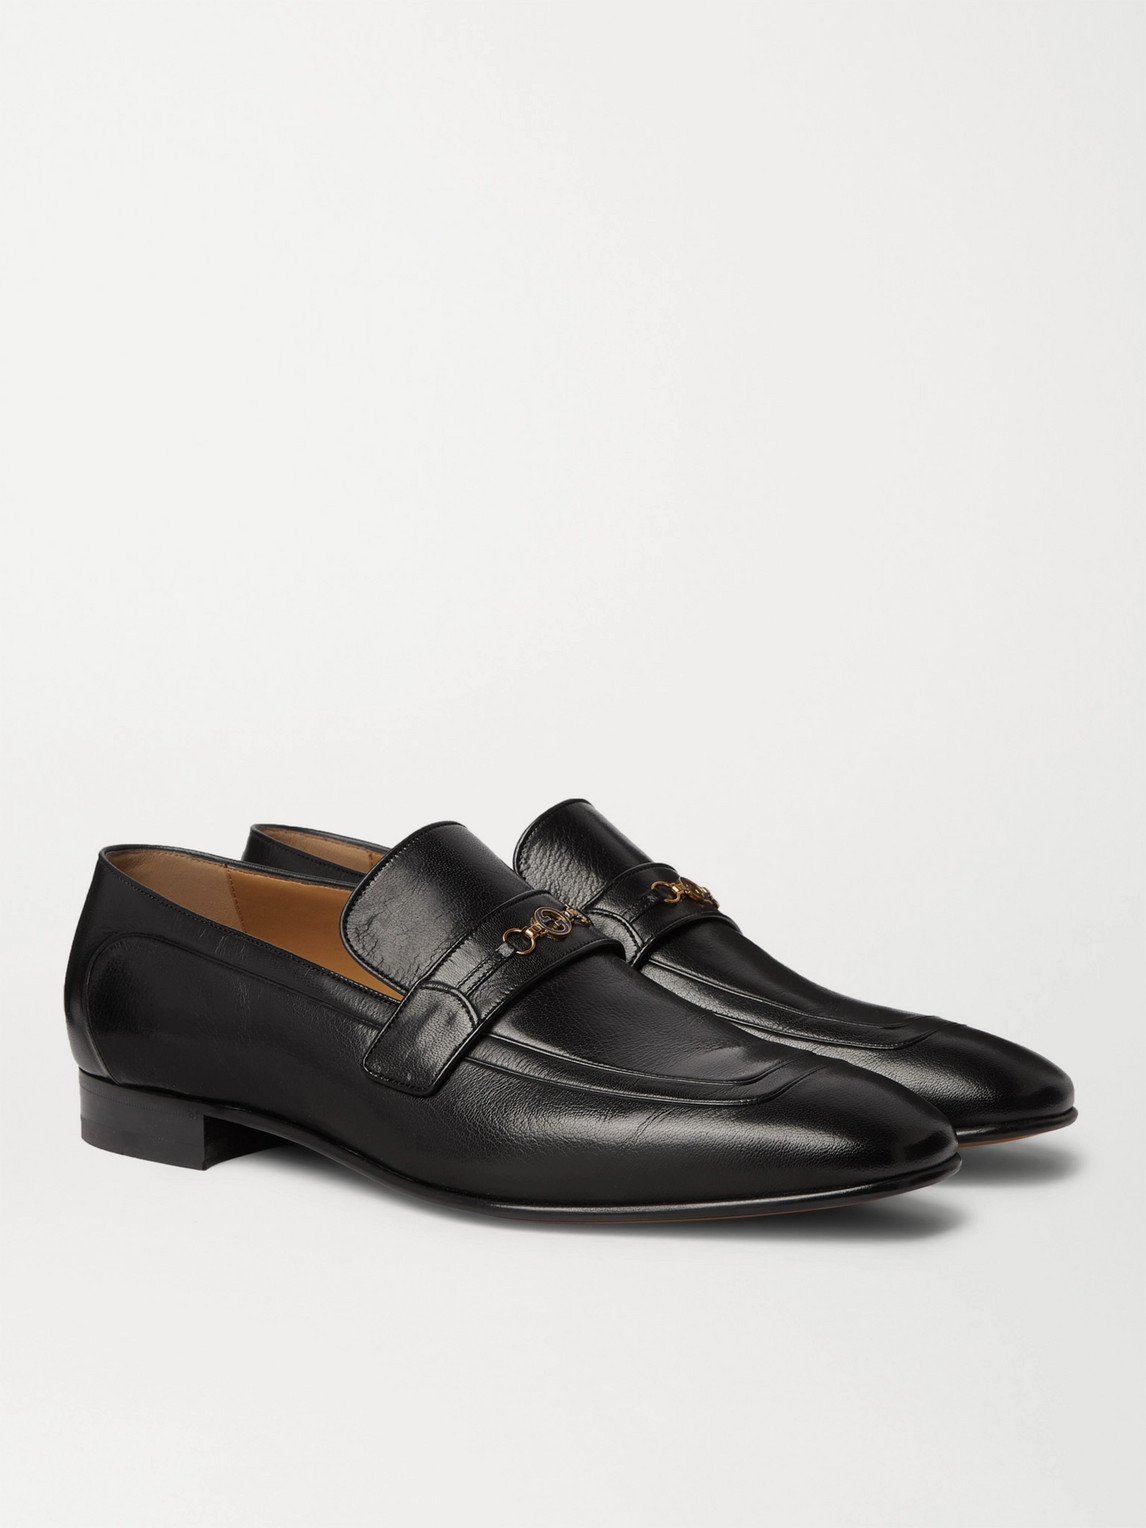 GUCCI HORSEBIT LEATHER LOAFERS